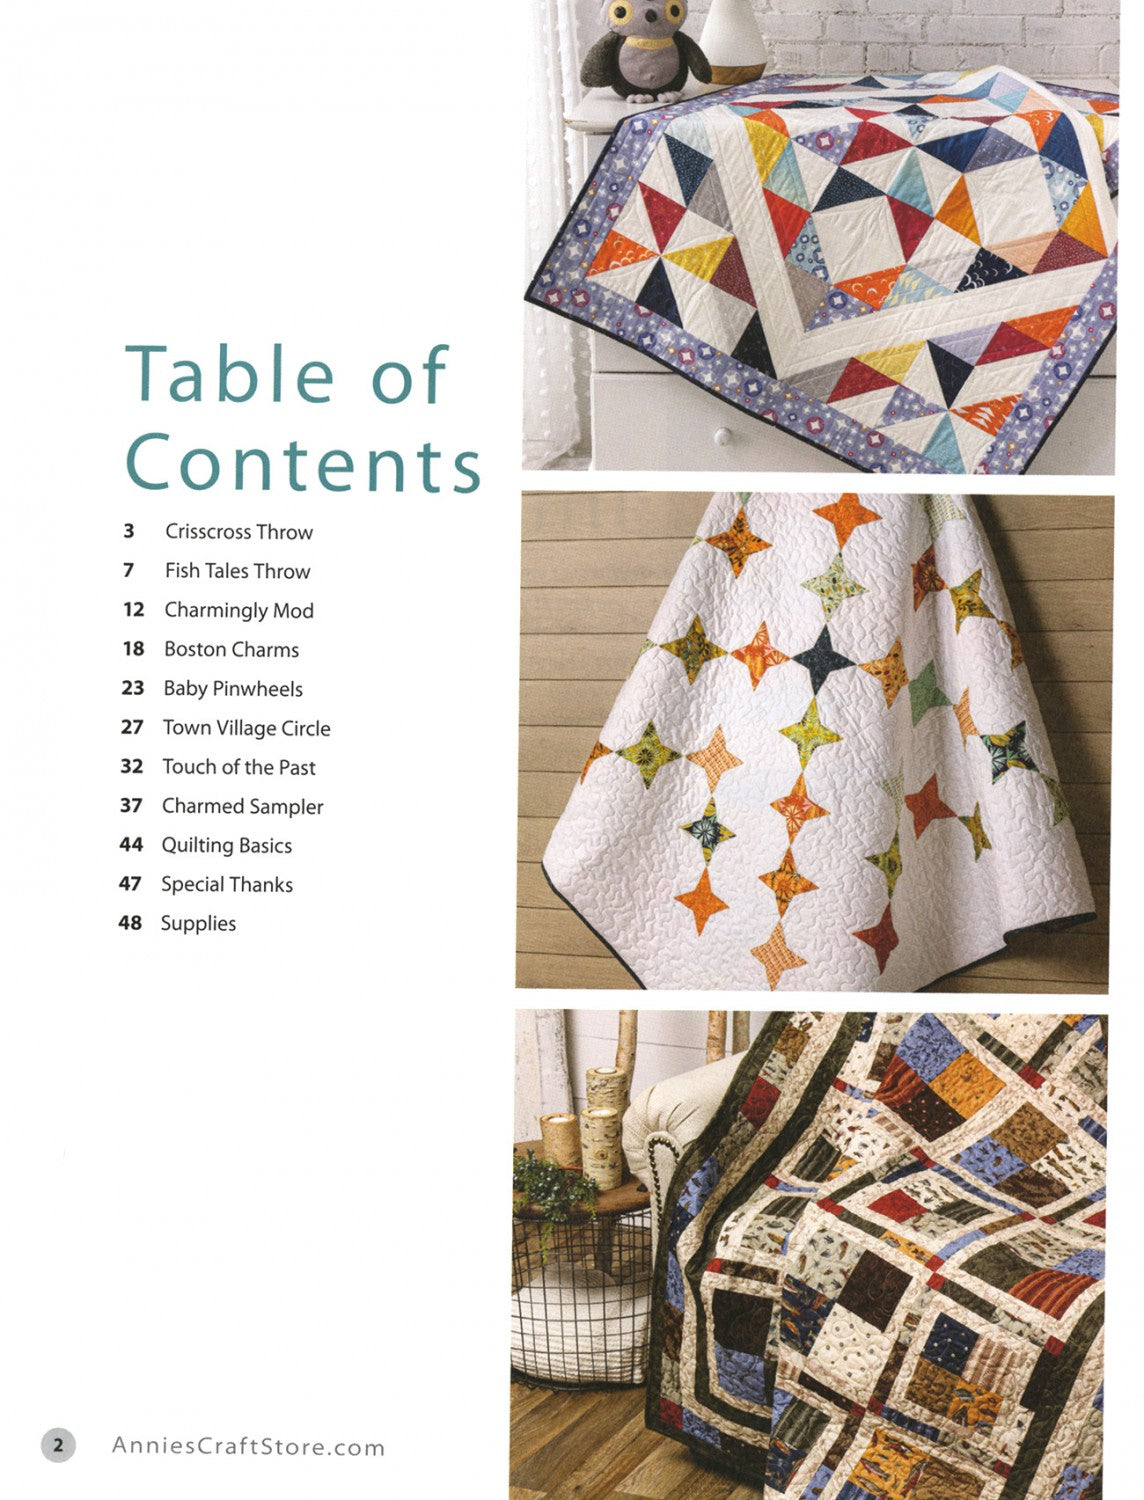 Time-Saving Charm Quilts